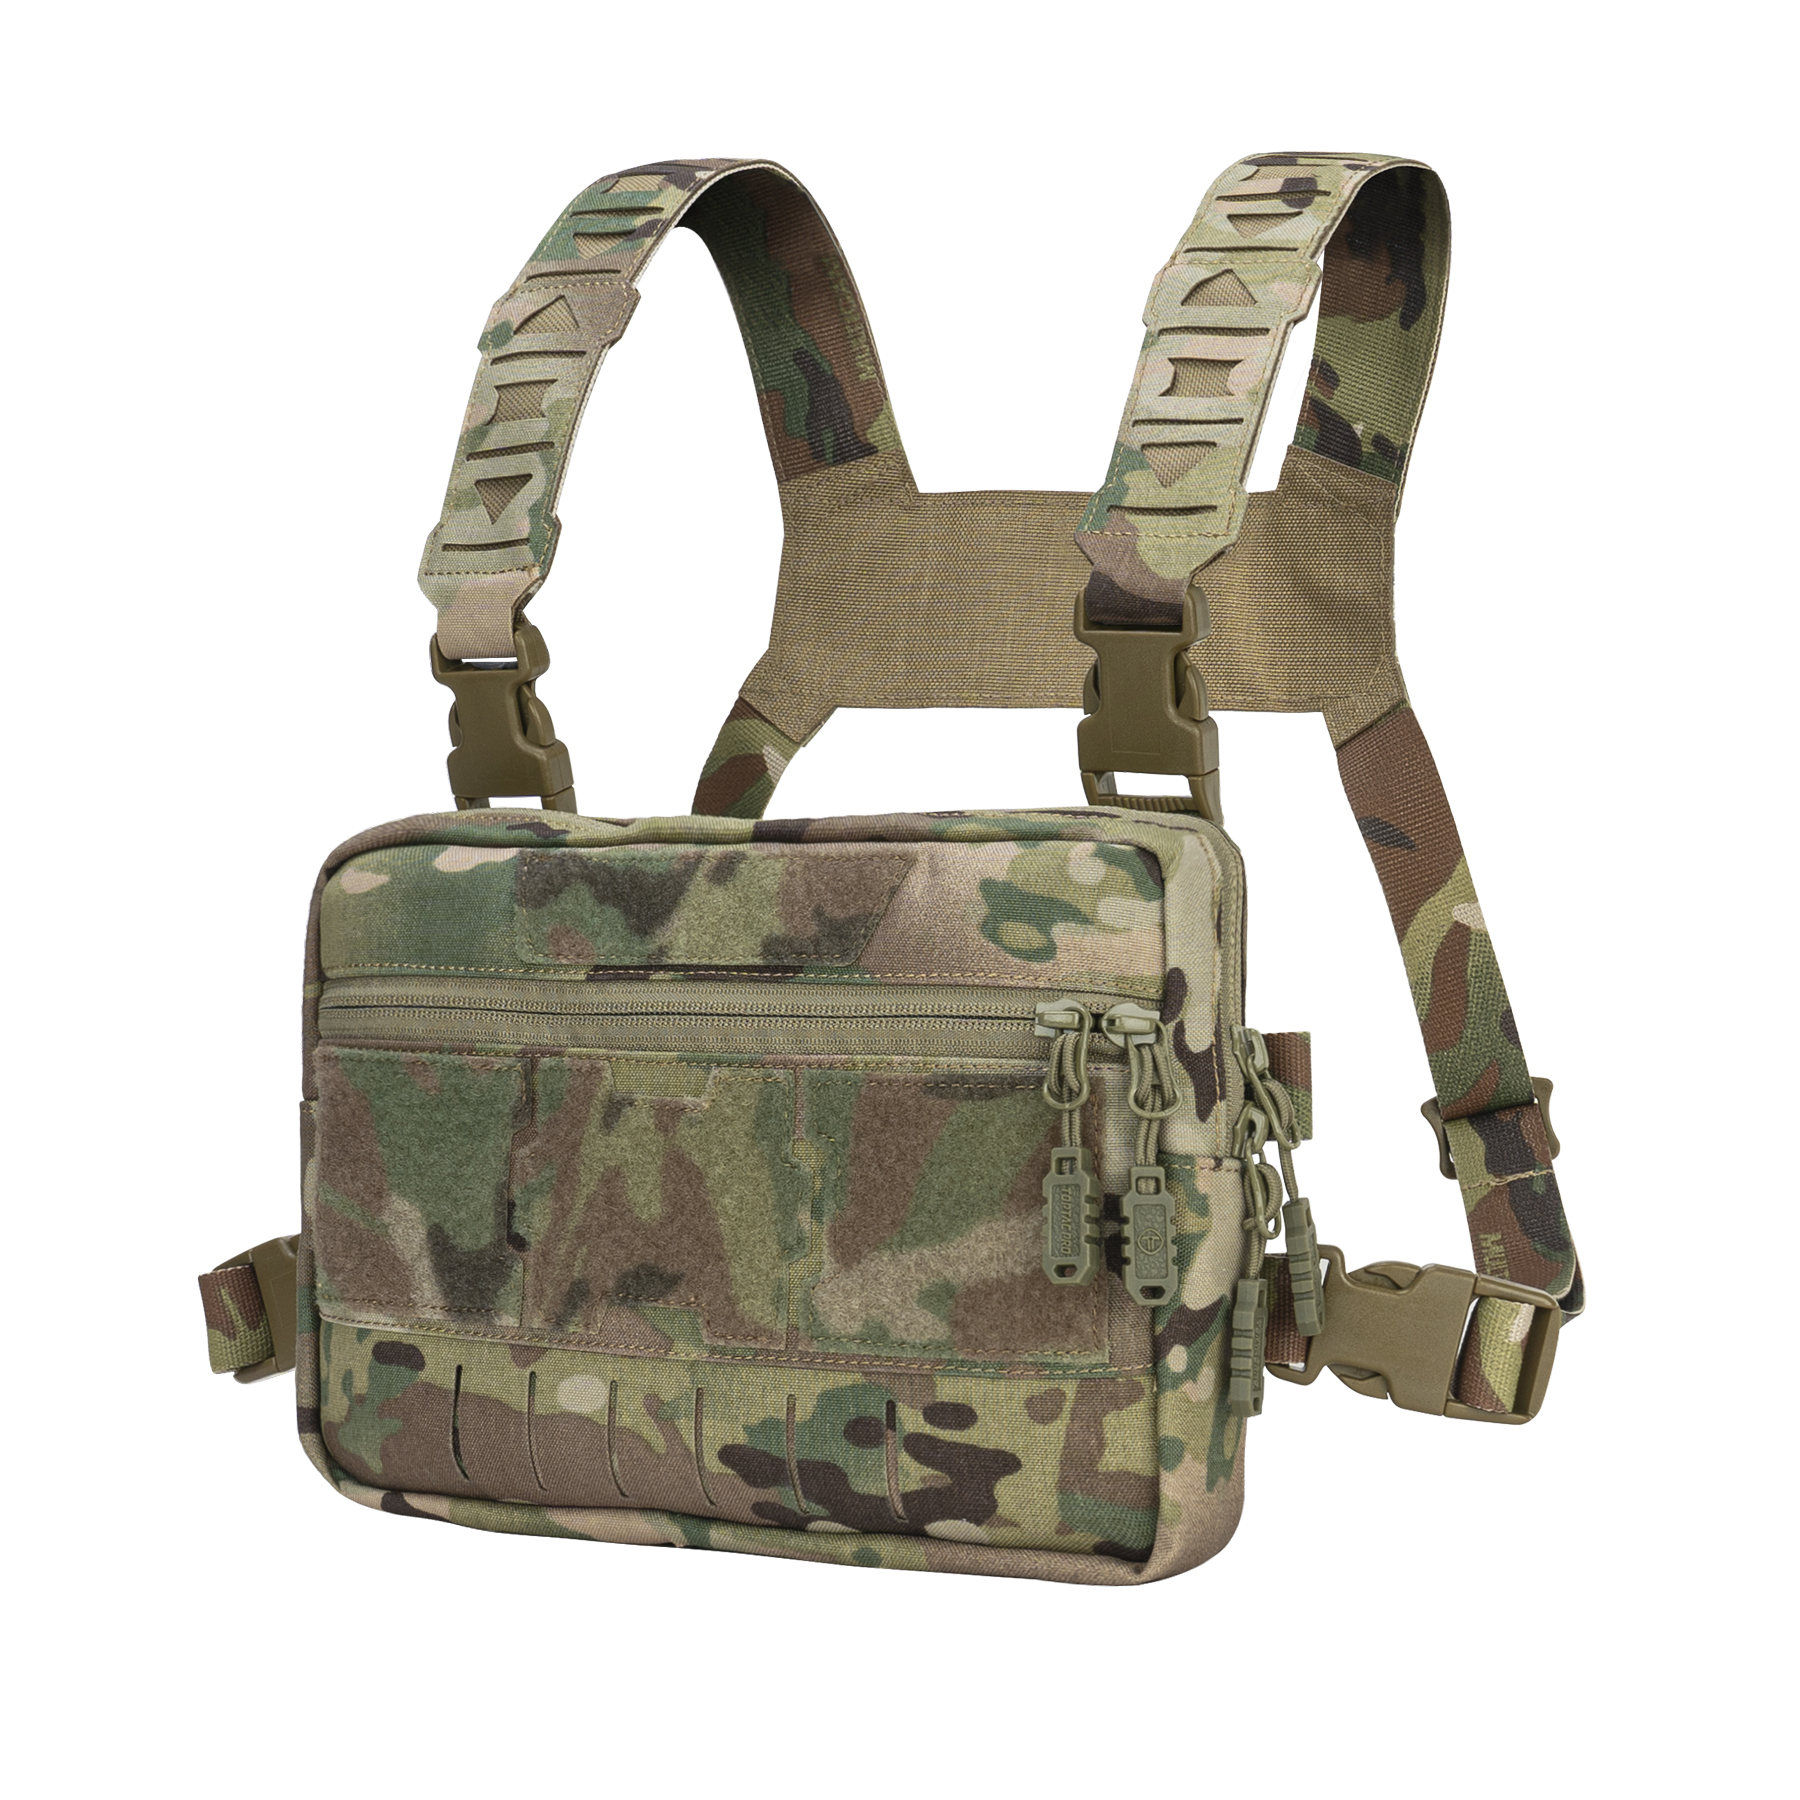 TOPTACPRO Tactical Chest Rig Bag Chest Recon Bag MOLLE Adjustable Shoulder Strap Pack 8511-IDOGEAR INDUSTRIAL